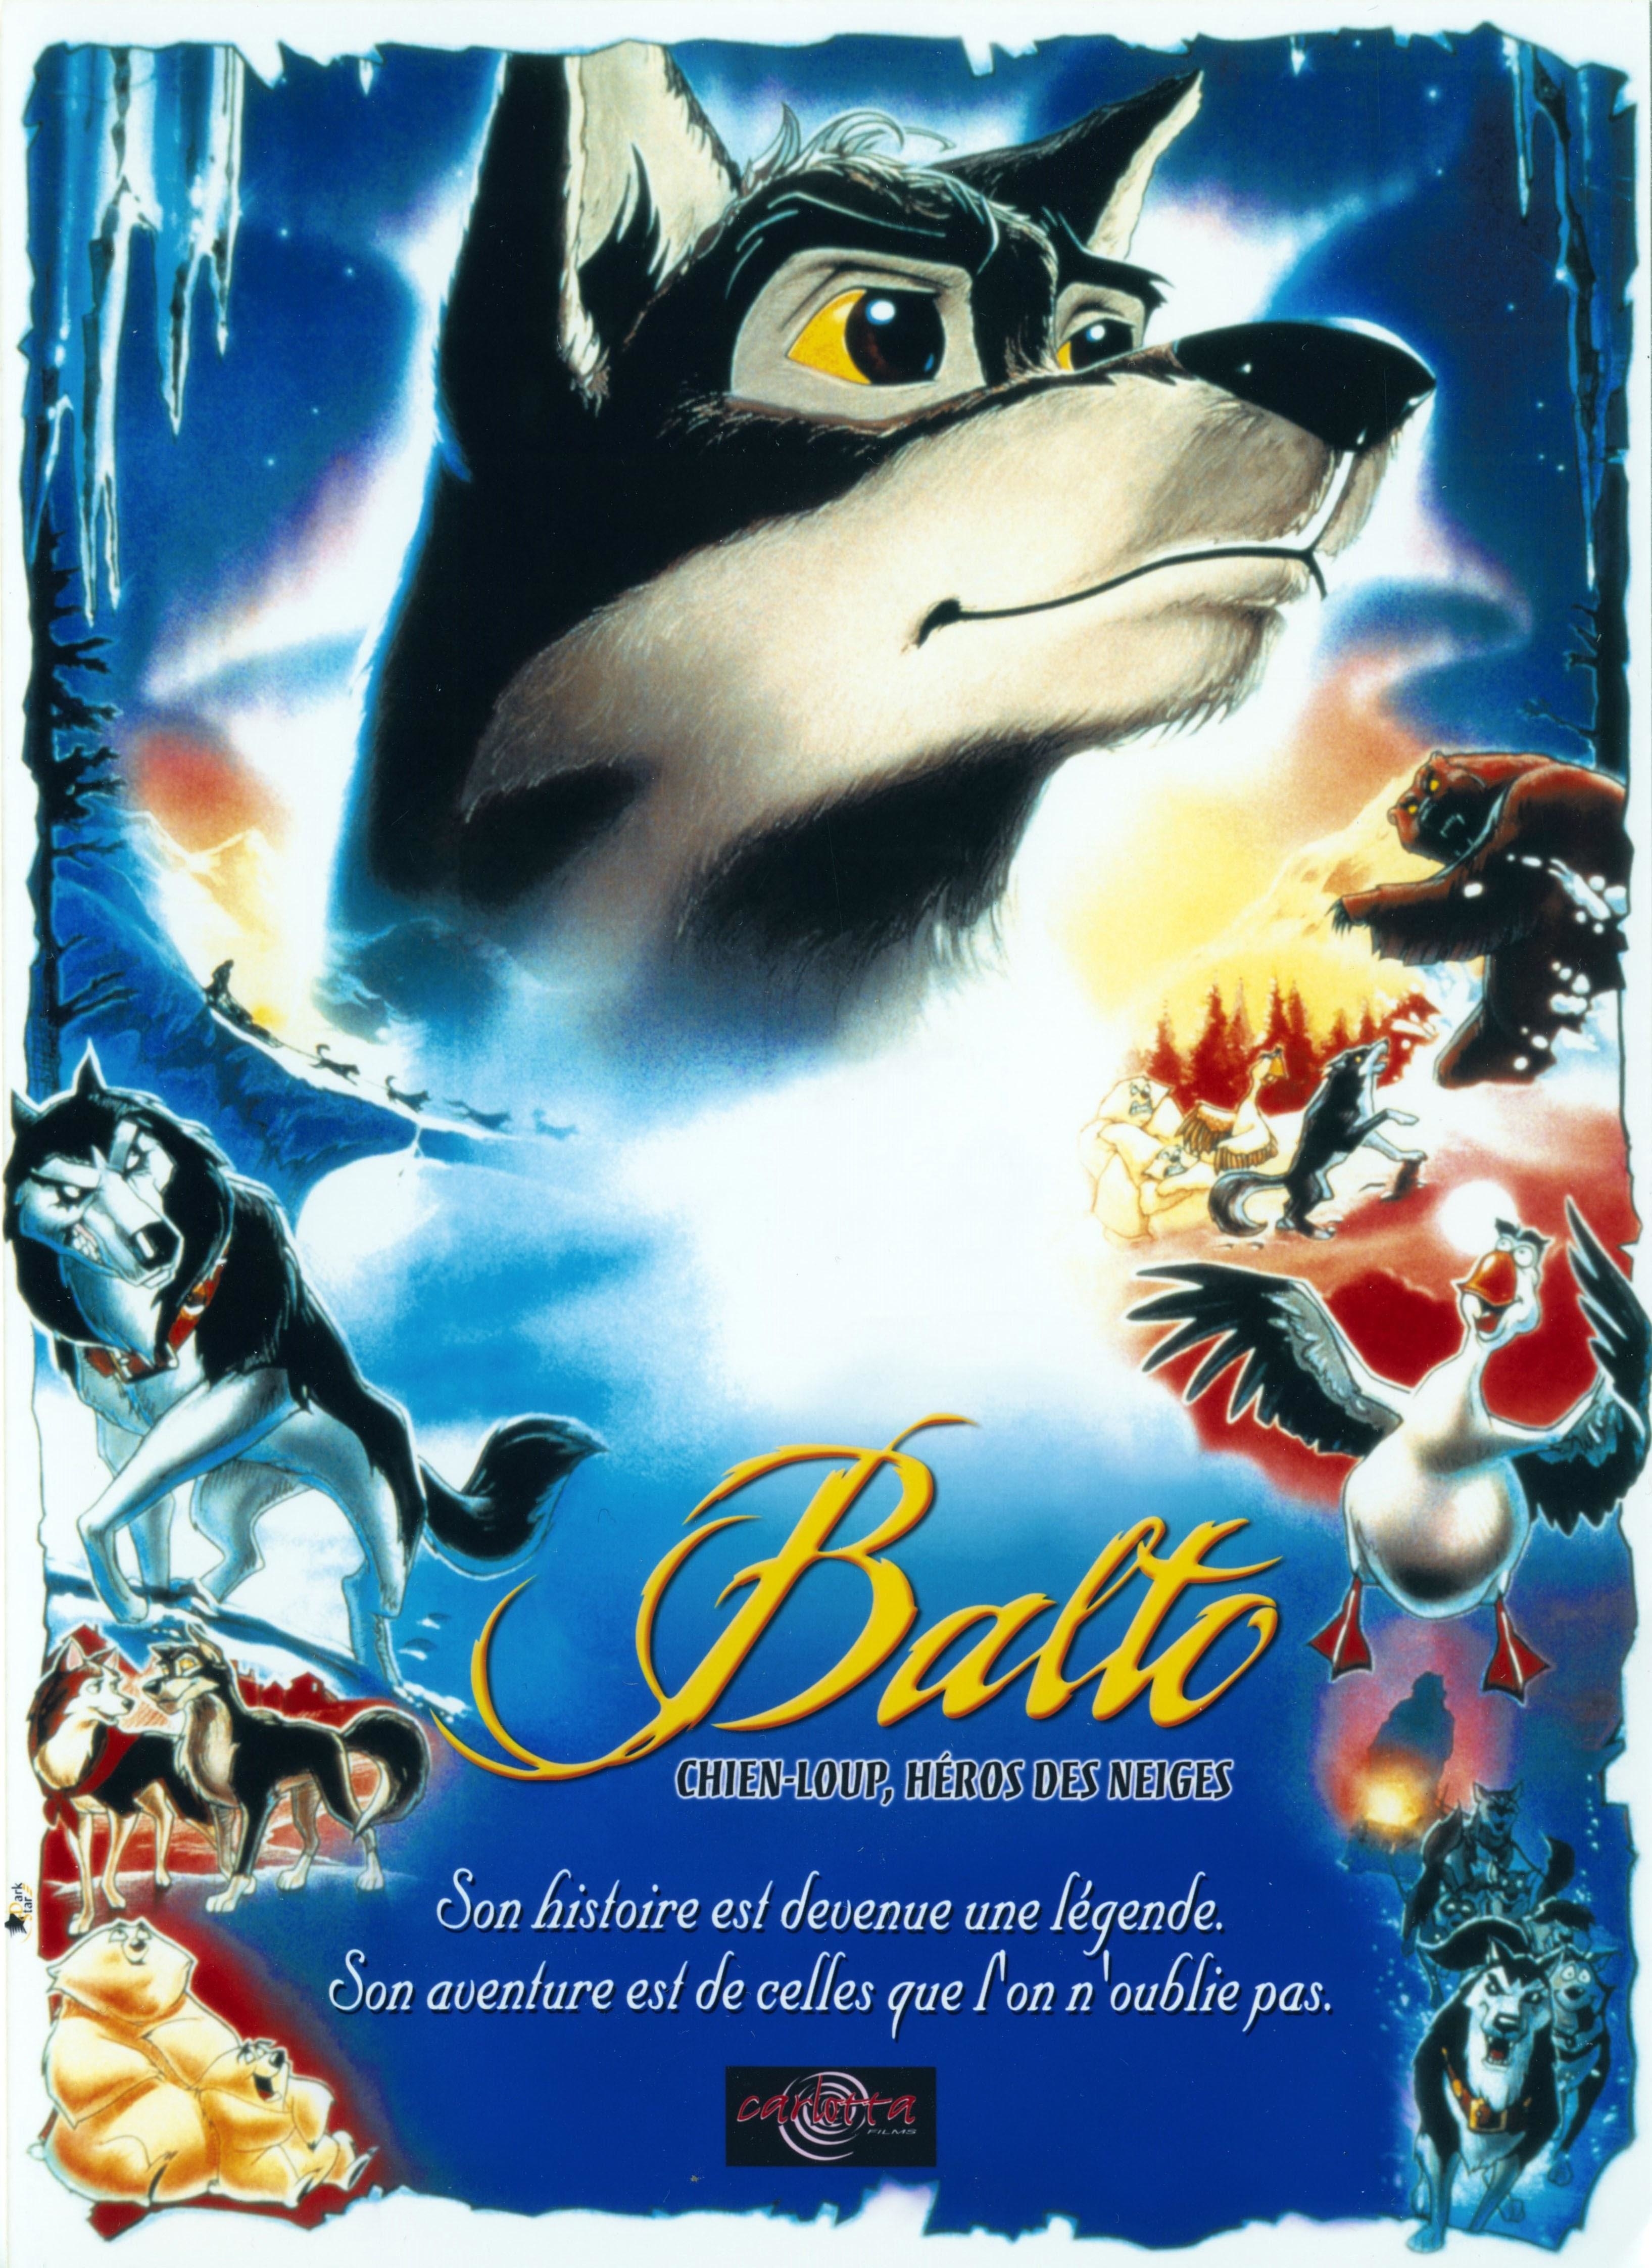 Poster image for the animated film Balto, featuring the face of the dog Balto at the top and several scenes from the film in a collage at the bottom of the poster around the Title.